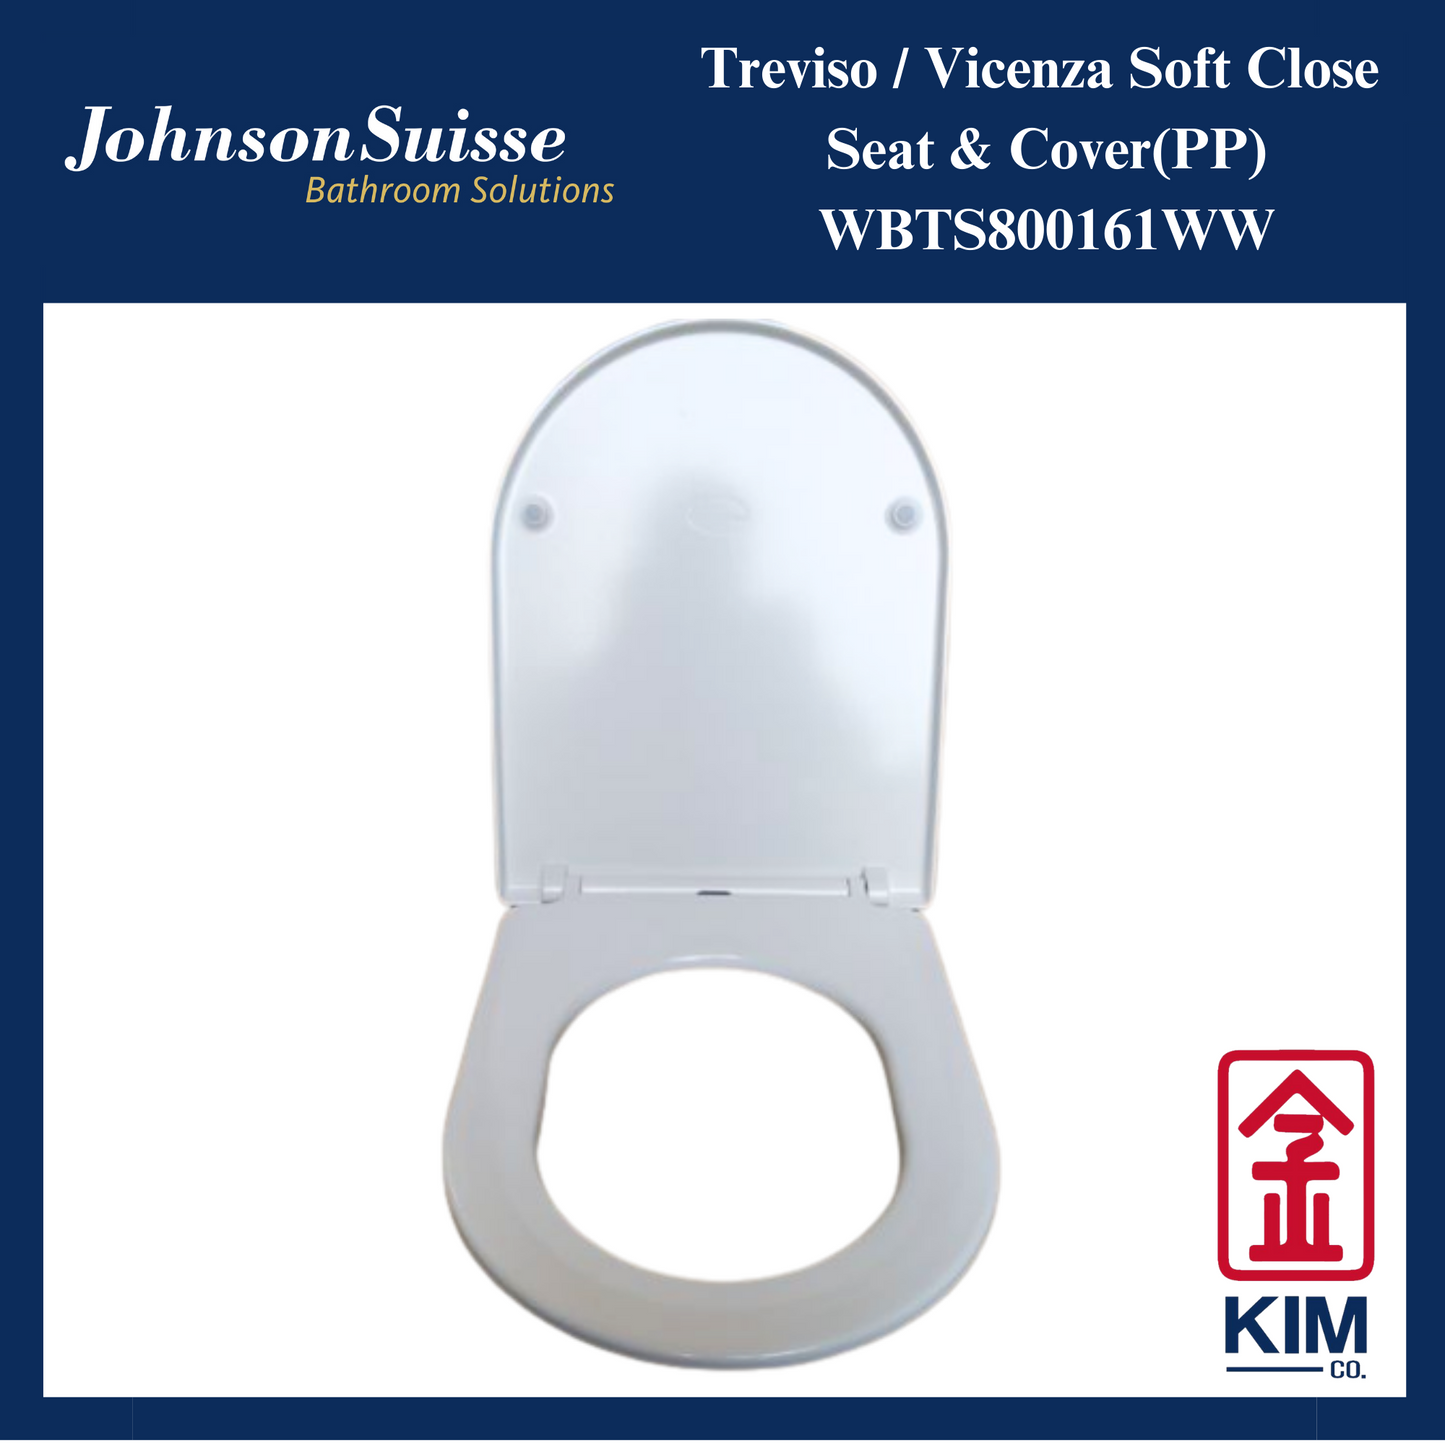 Johnson Suisse Treviso / Vicenza Soft Close Seat & Cover (UF)(WBTS800173WW)